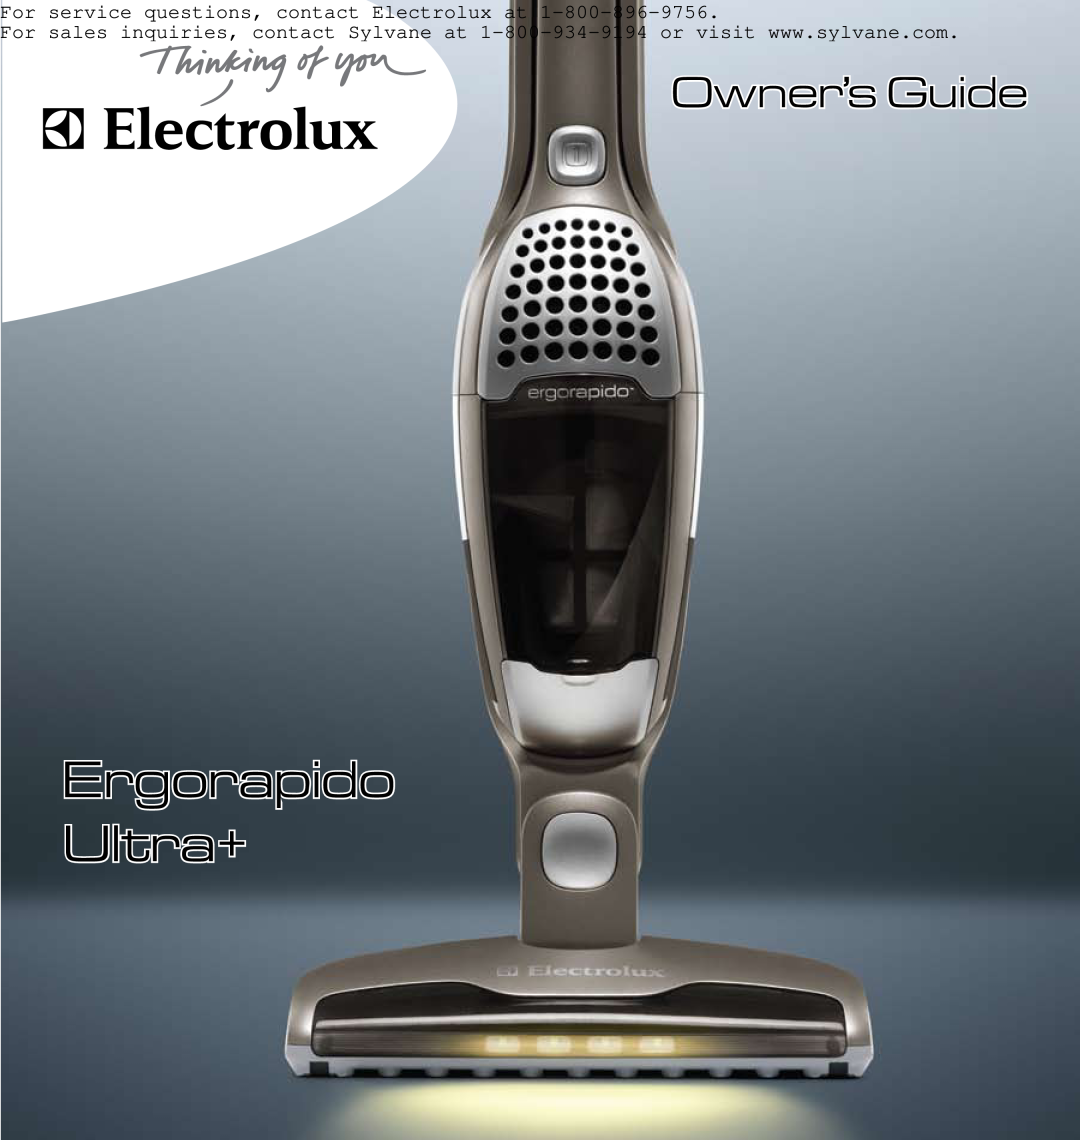 Electrolux EL1061A manual For service questions, contact Electrolux at, Ergorapido Ultra+, Owner’s Guide 